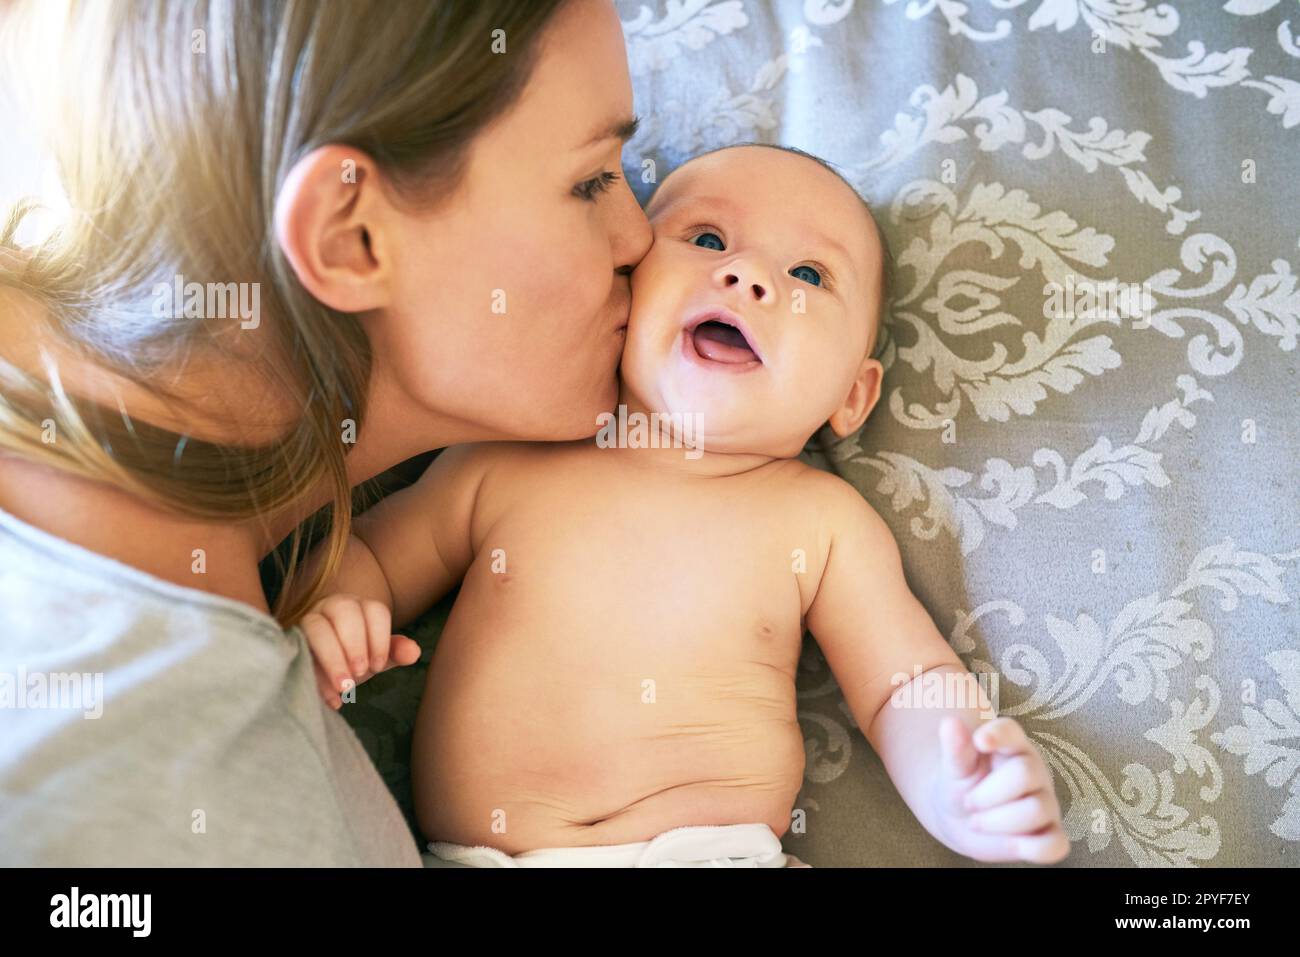 You perfect to me in every way. a young mother and her baby at home. Stock Photo